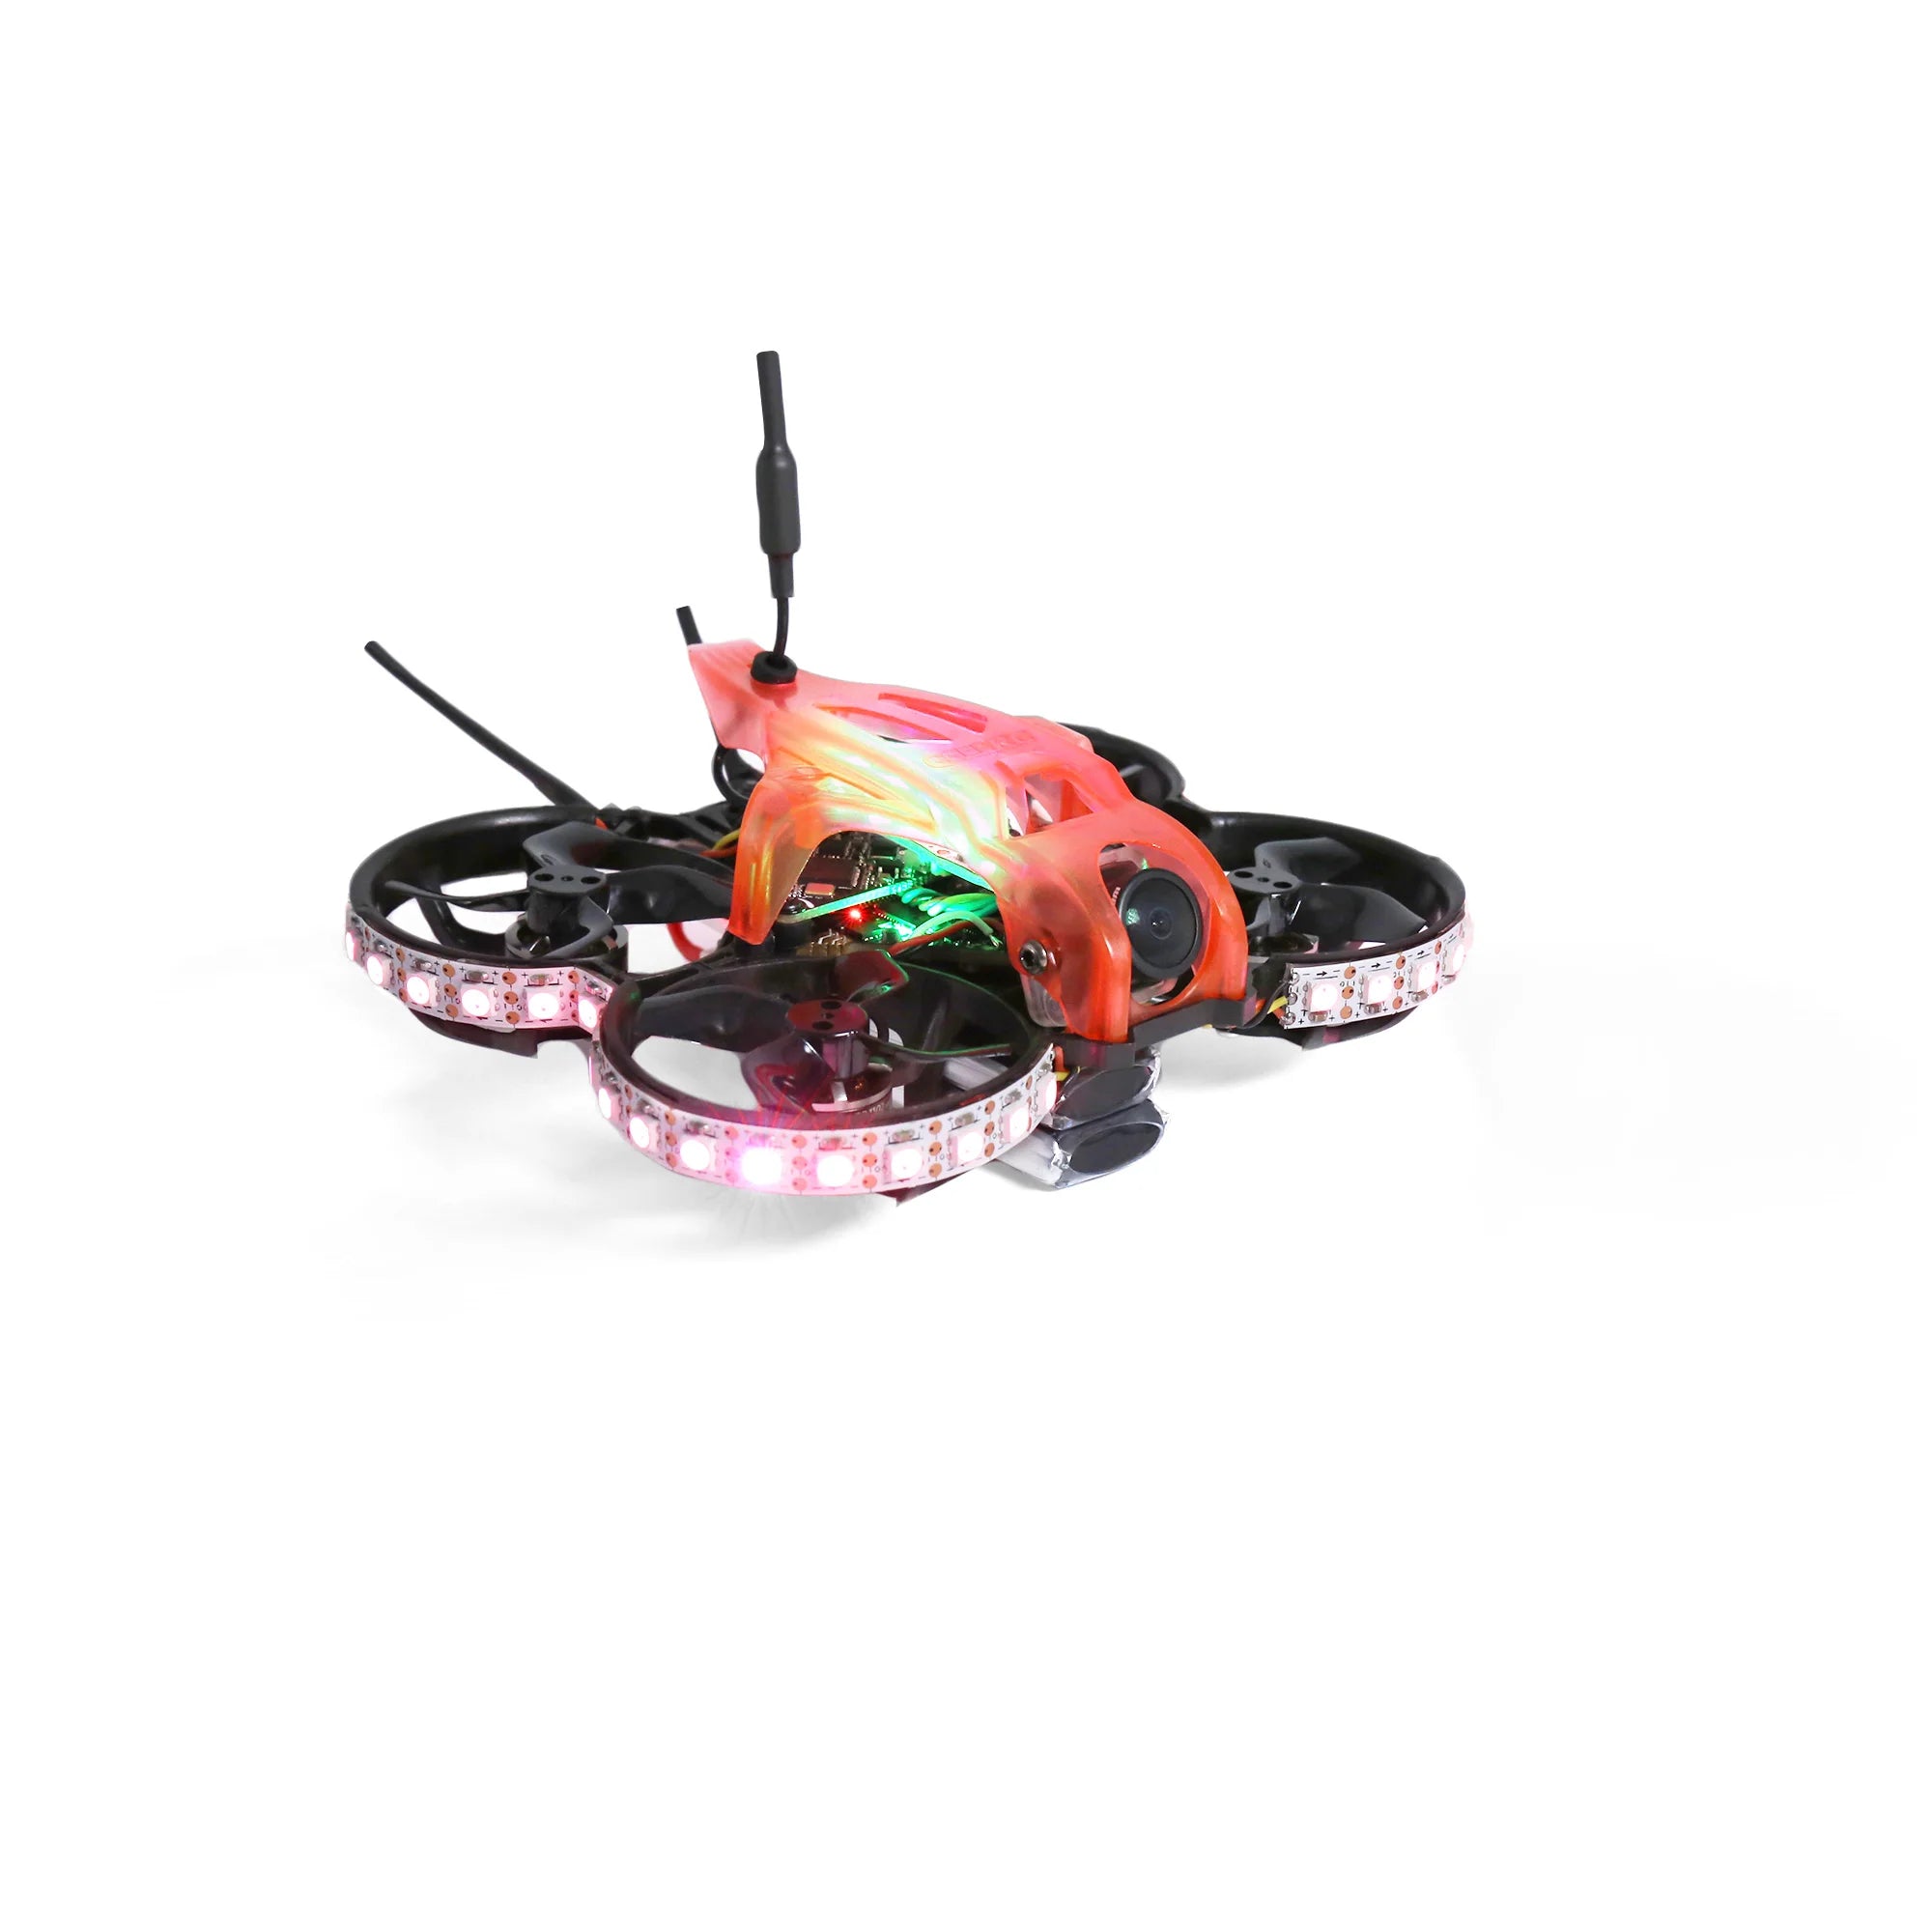 GEPRC TinyGO LED  Whoop RTF FPV Drone, TinyRadio GR8 Remote Controller is specially designed for Novice and indoor flight .